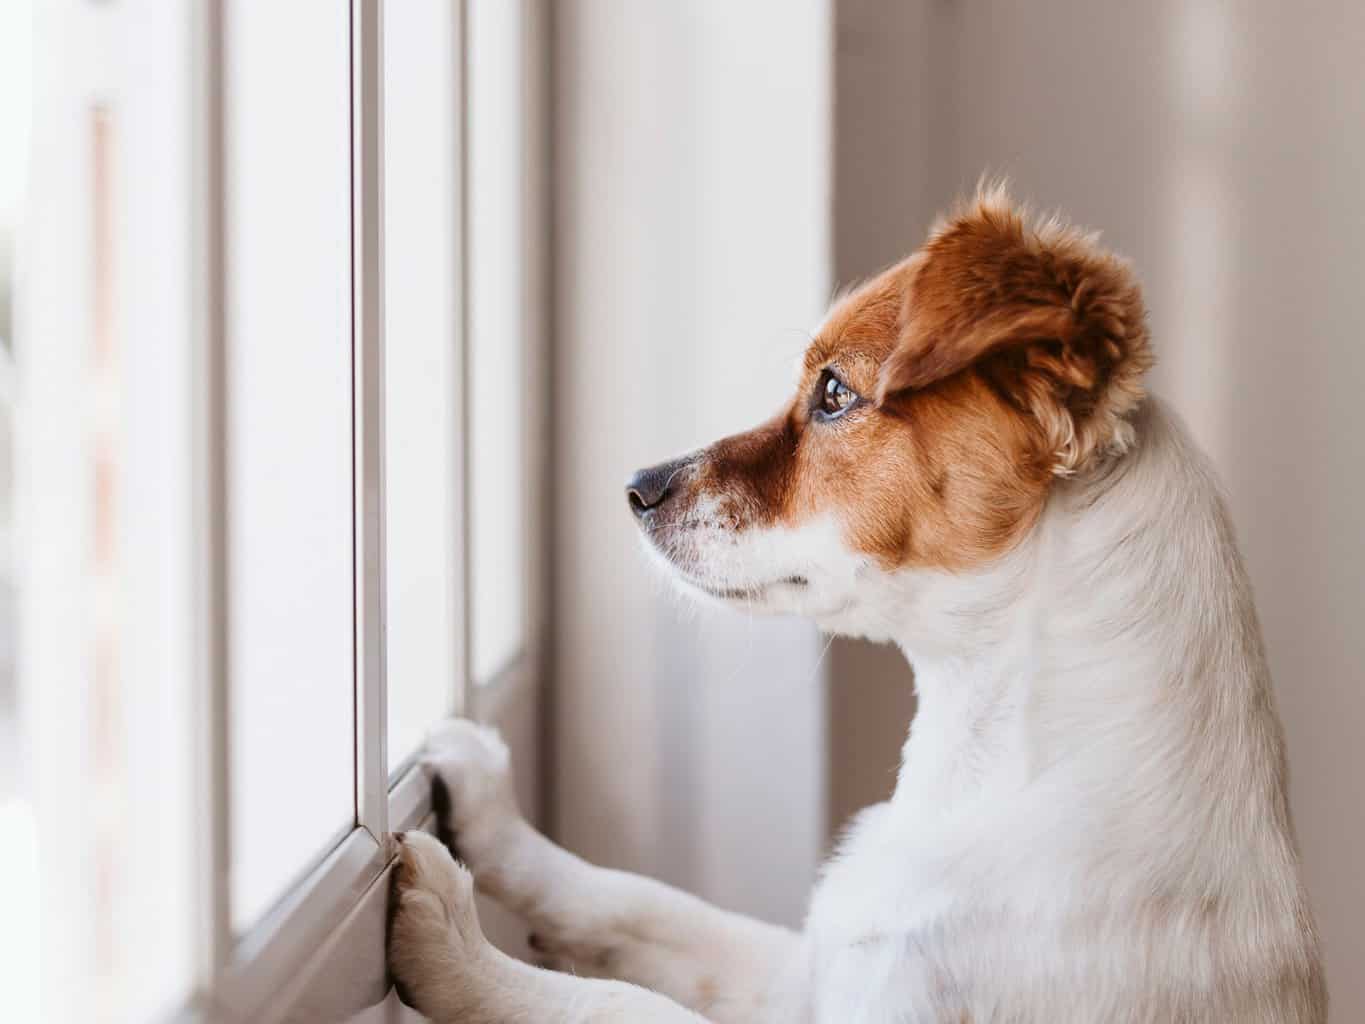 dog looking worried, looking out of window